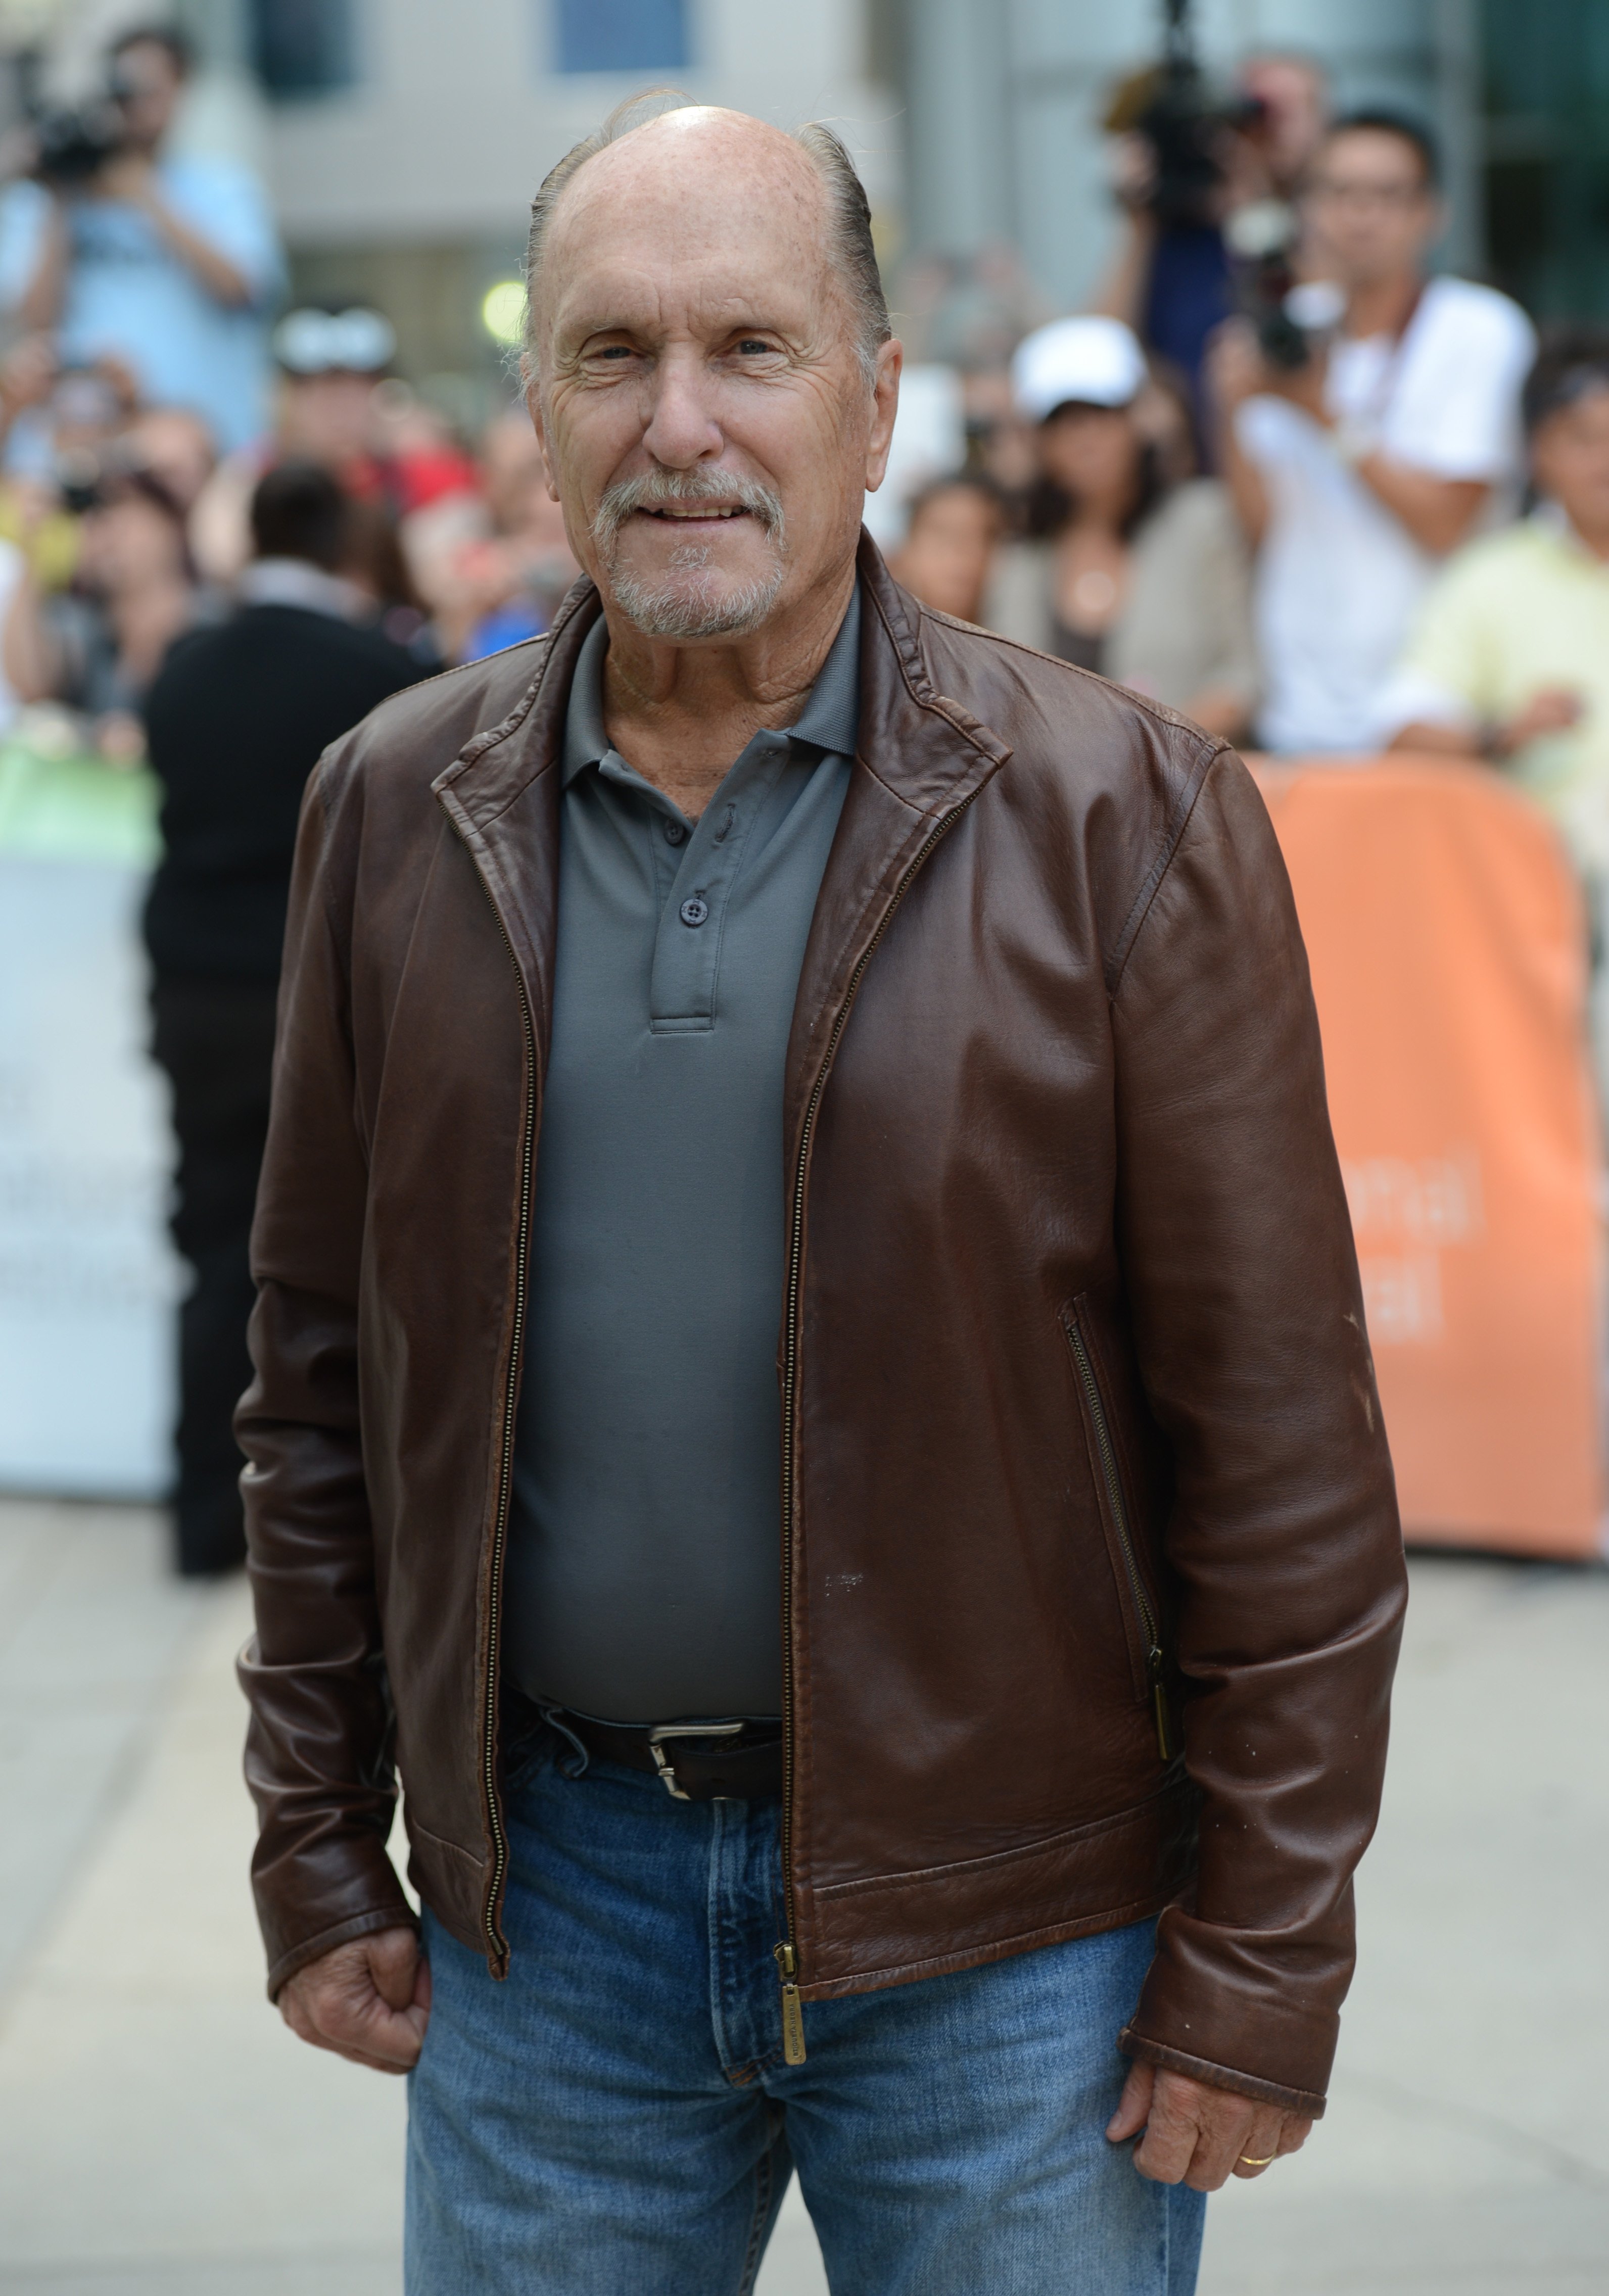 Robert Duval walks the Red Carpet for the film “Jayne Mansfield's Car” Toronto on September 13, 2012.  | Source: Getty Image